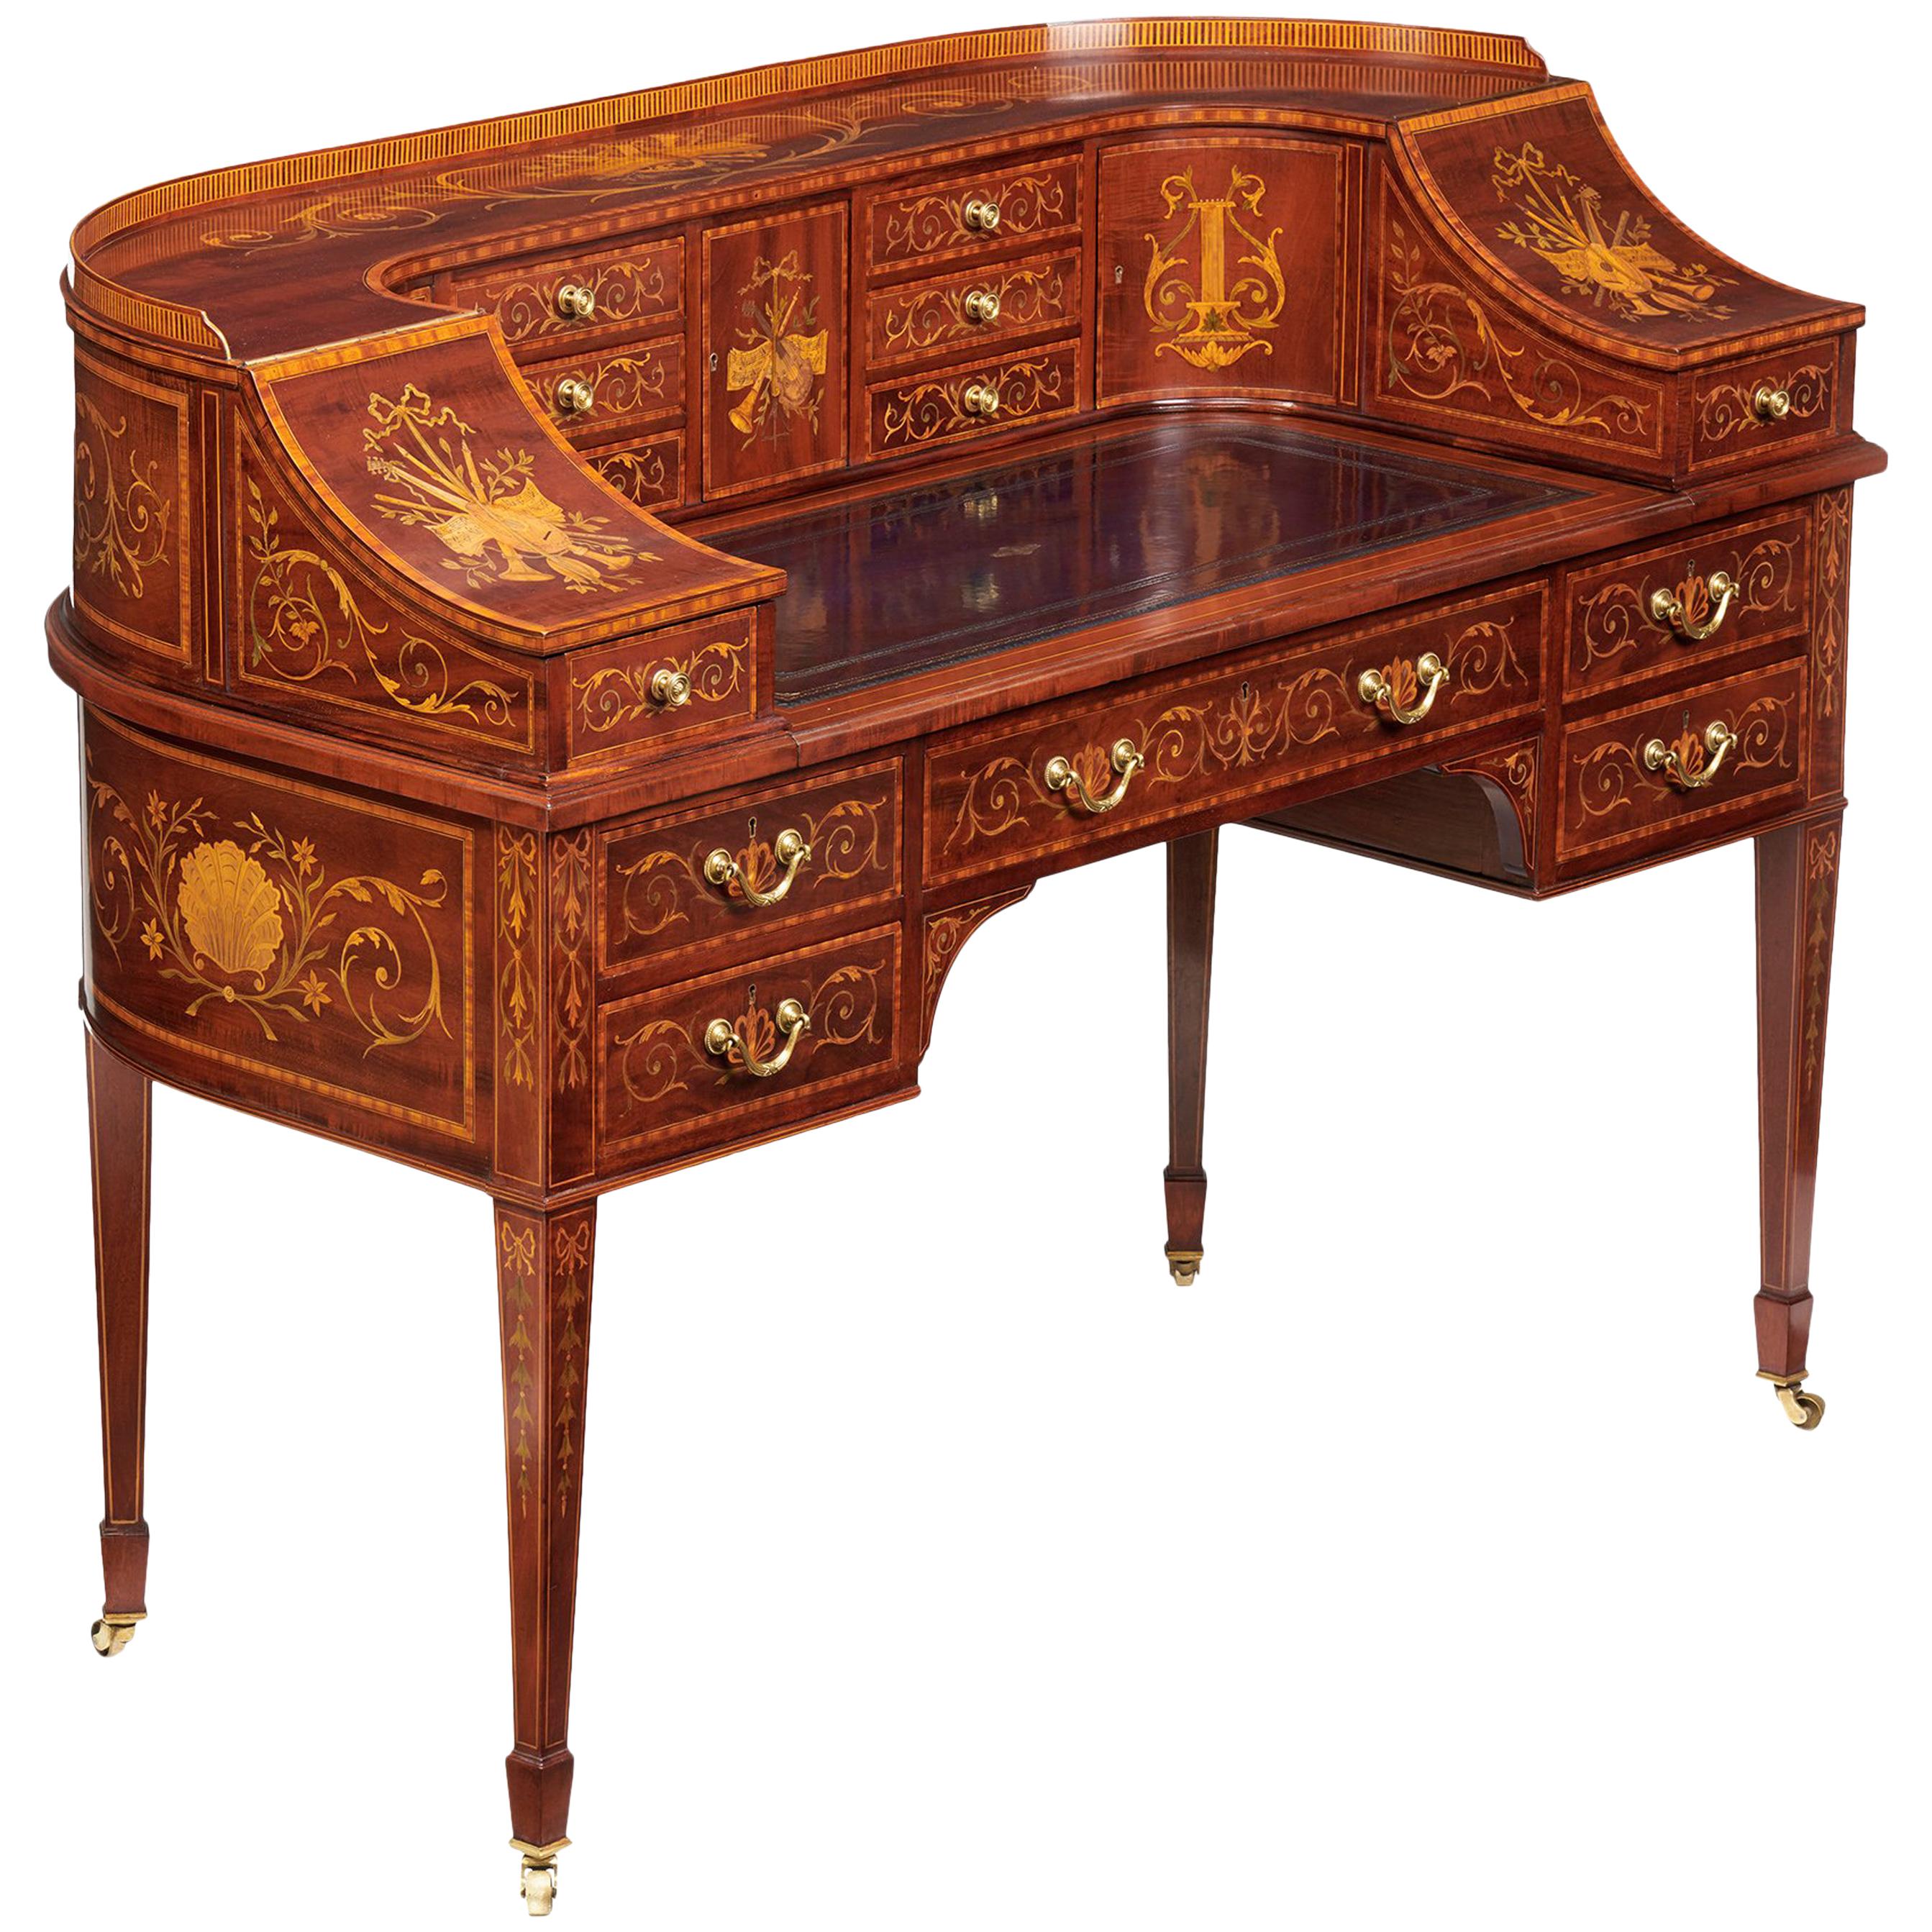 Maple & Co Mahogany, Satinwood and Marquetry Inlaid Victorian Carlton House Desk